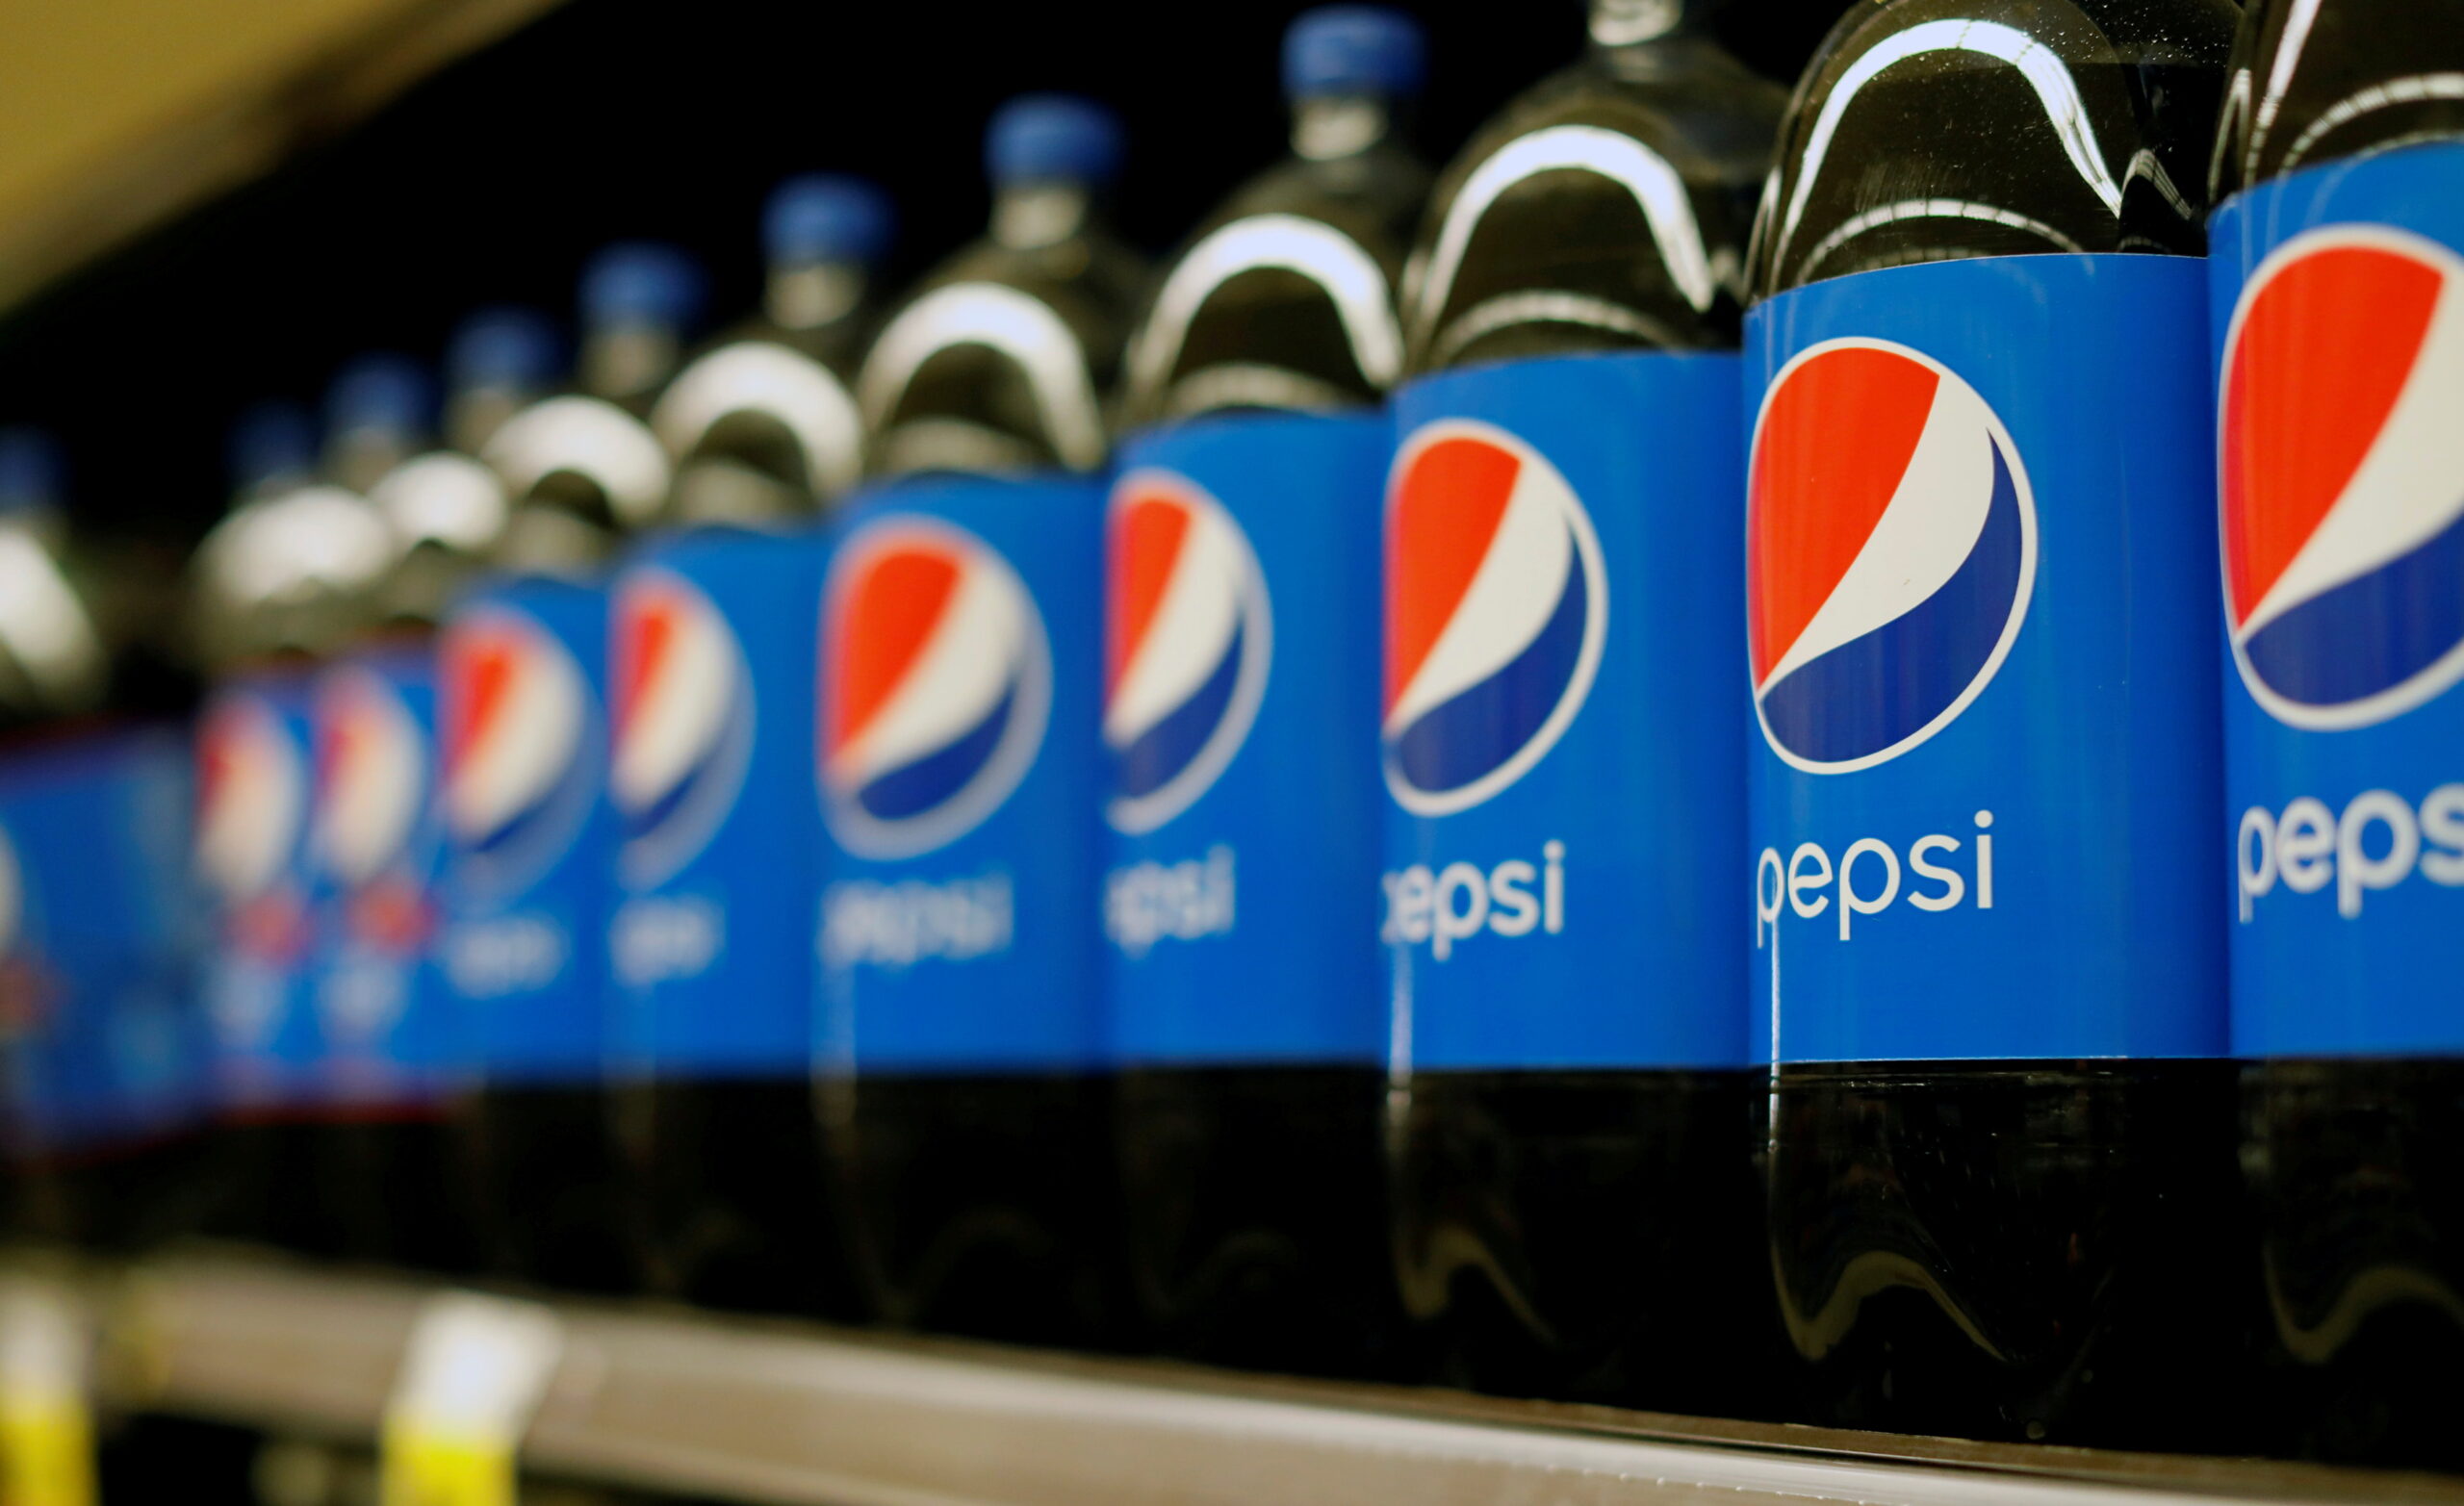 
Pepsico Joint Venture: How Collaborating With Other Companies Can Boost Your Business!